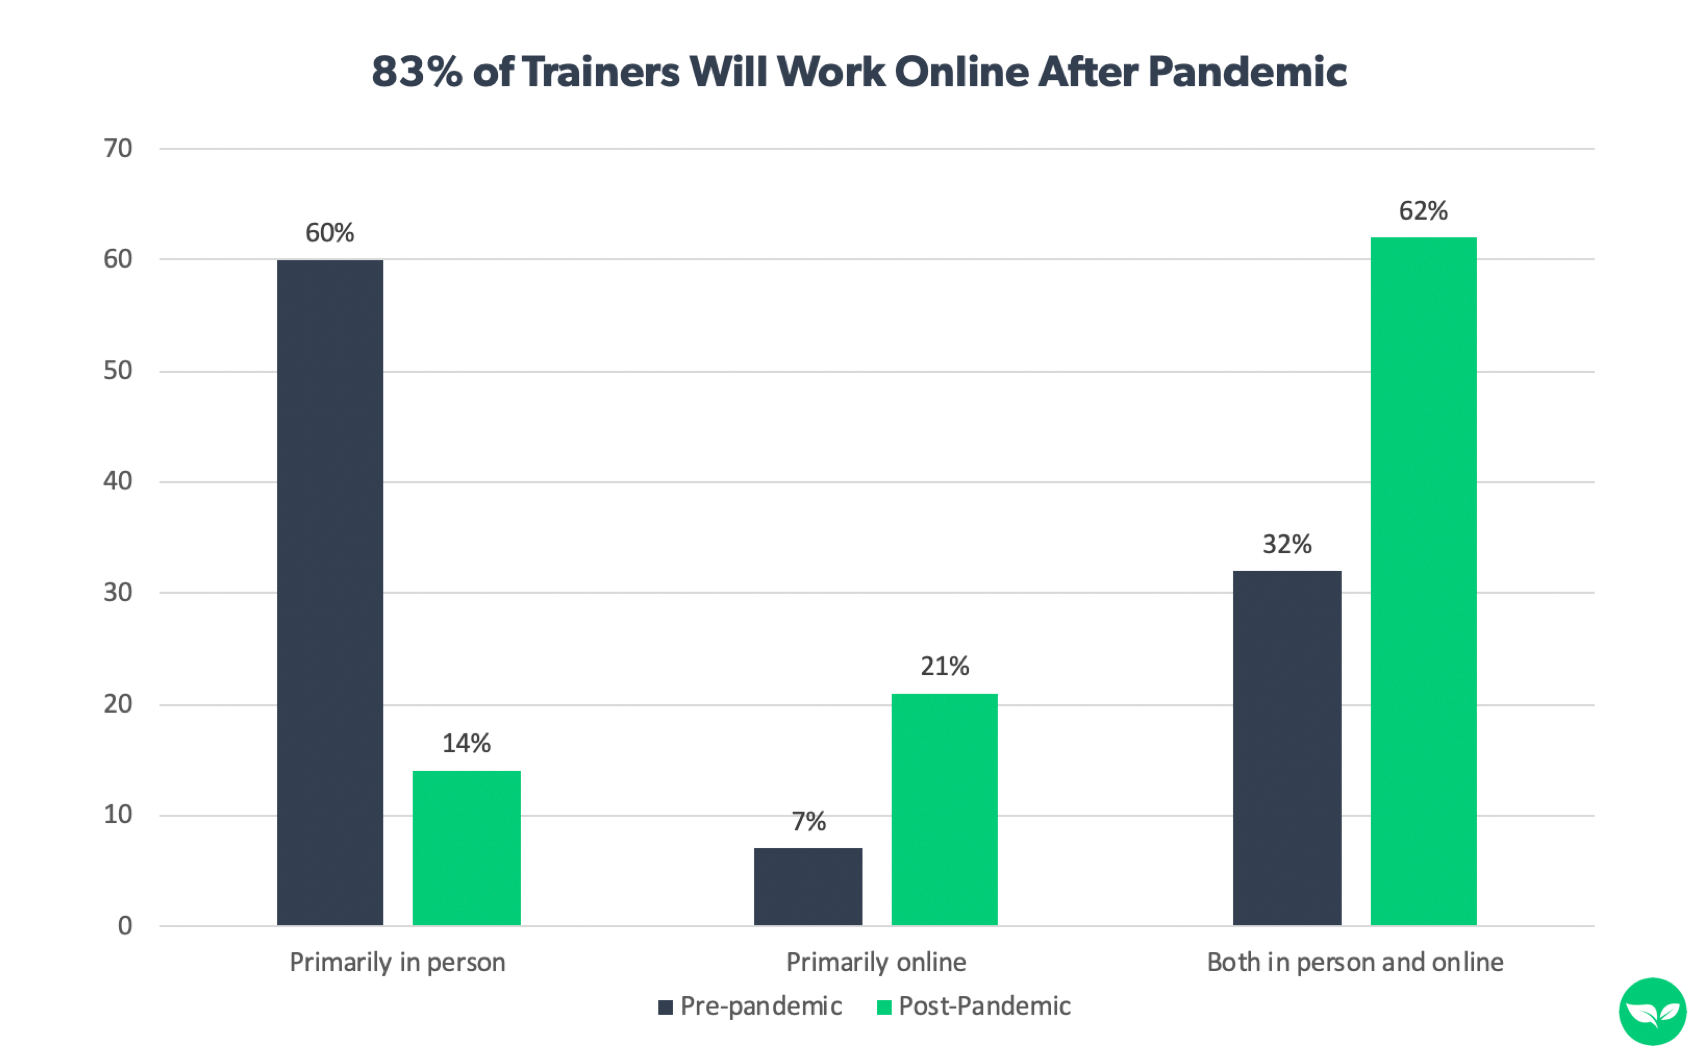 83% of personal trainers report that they will be working with clients online after the pandemic.